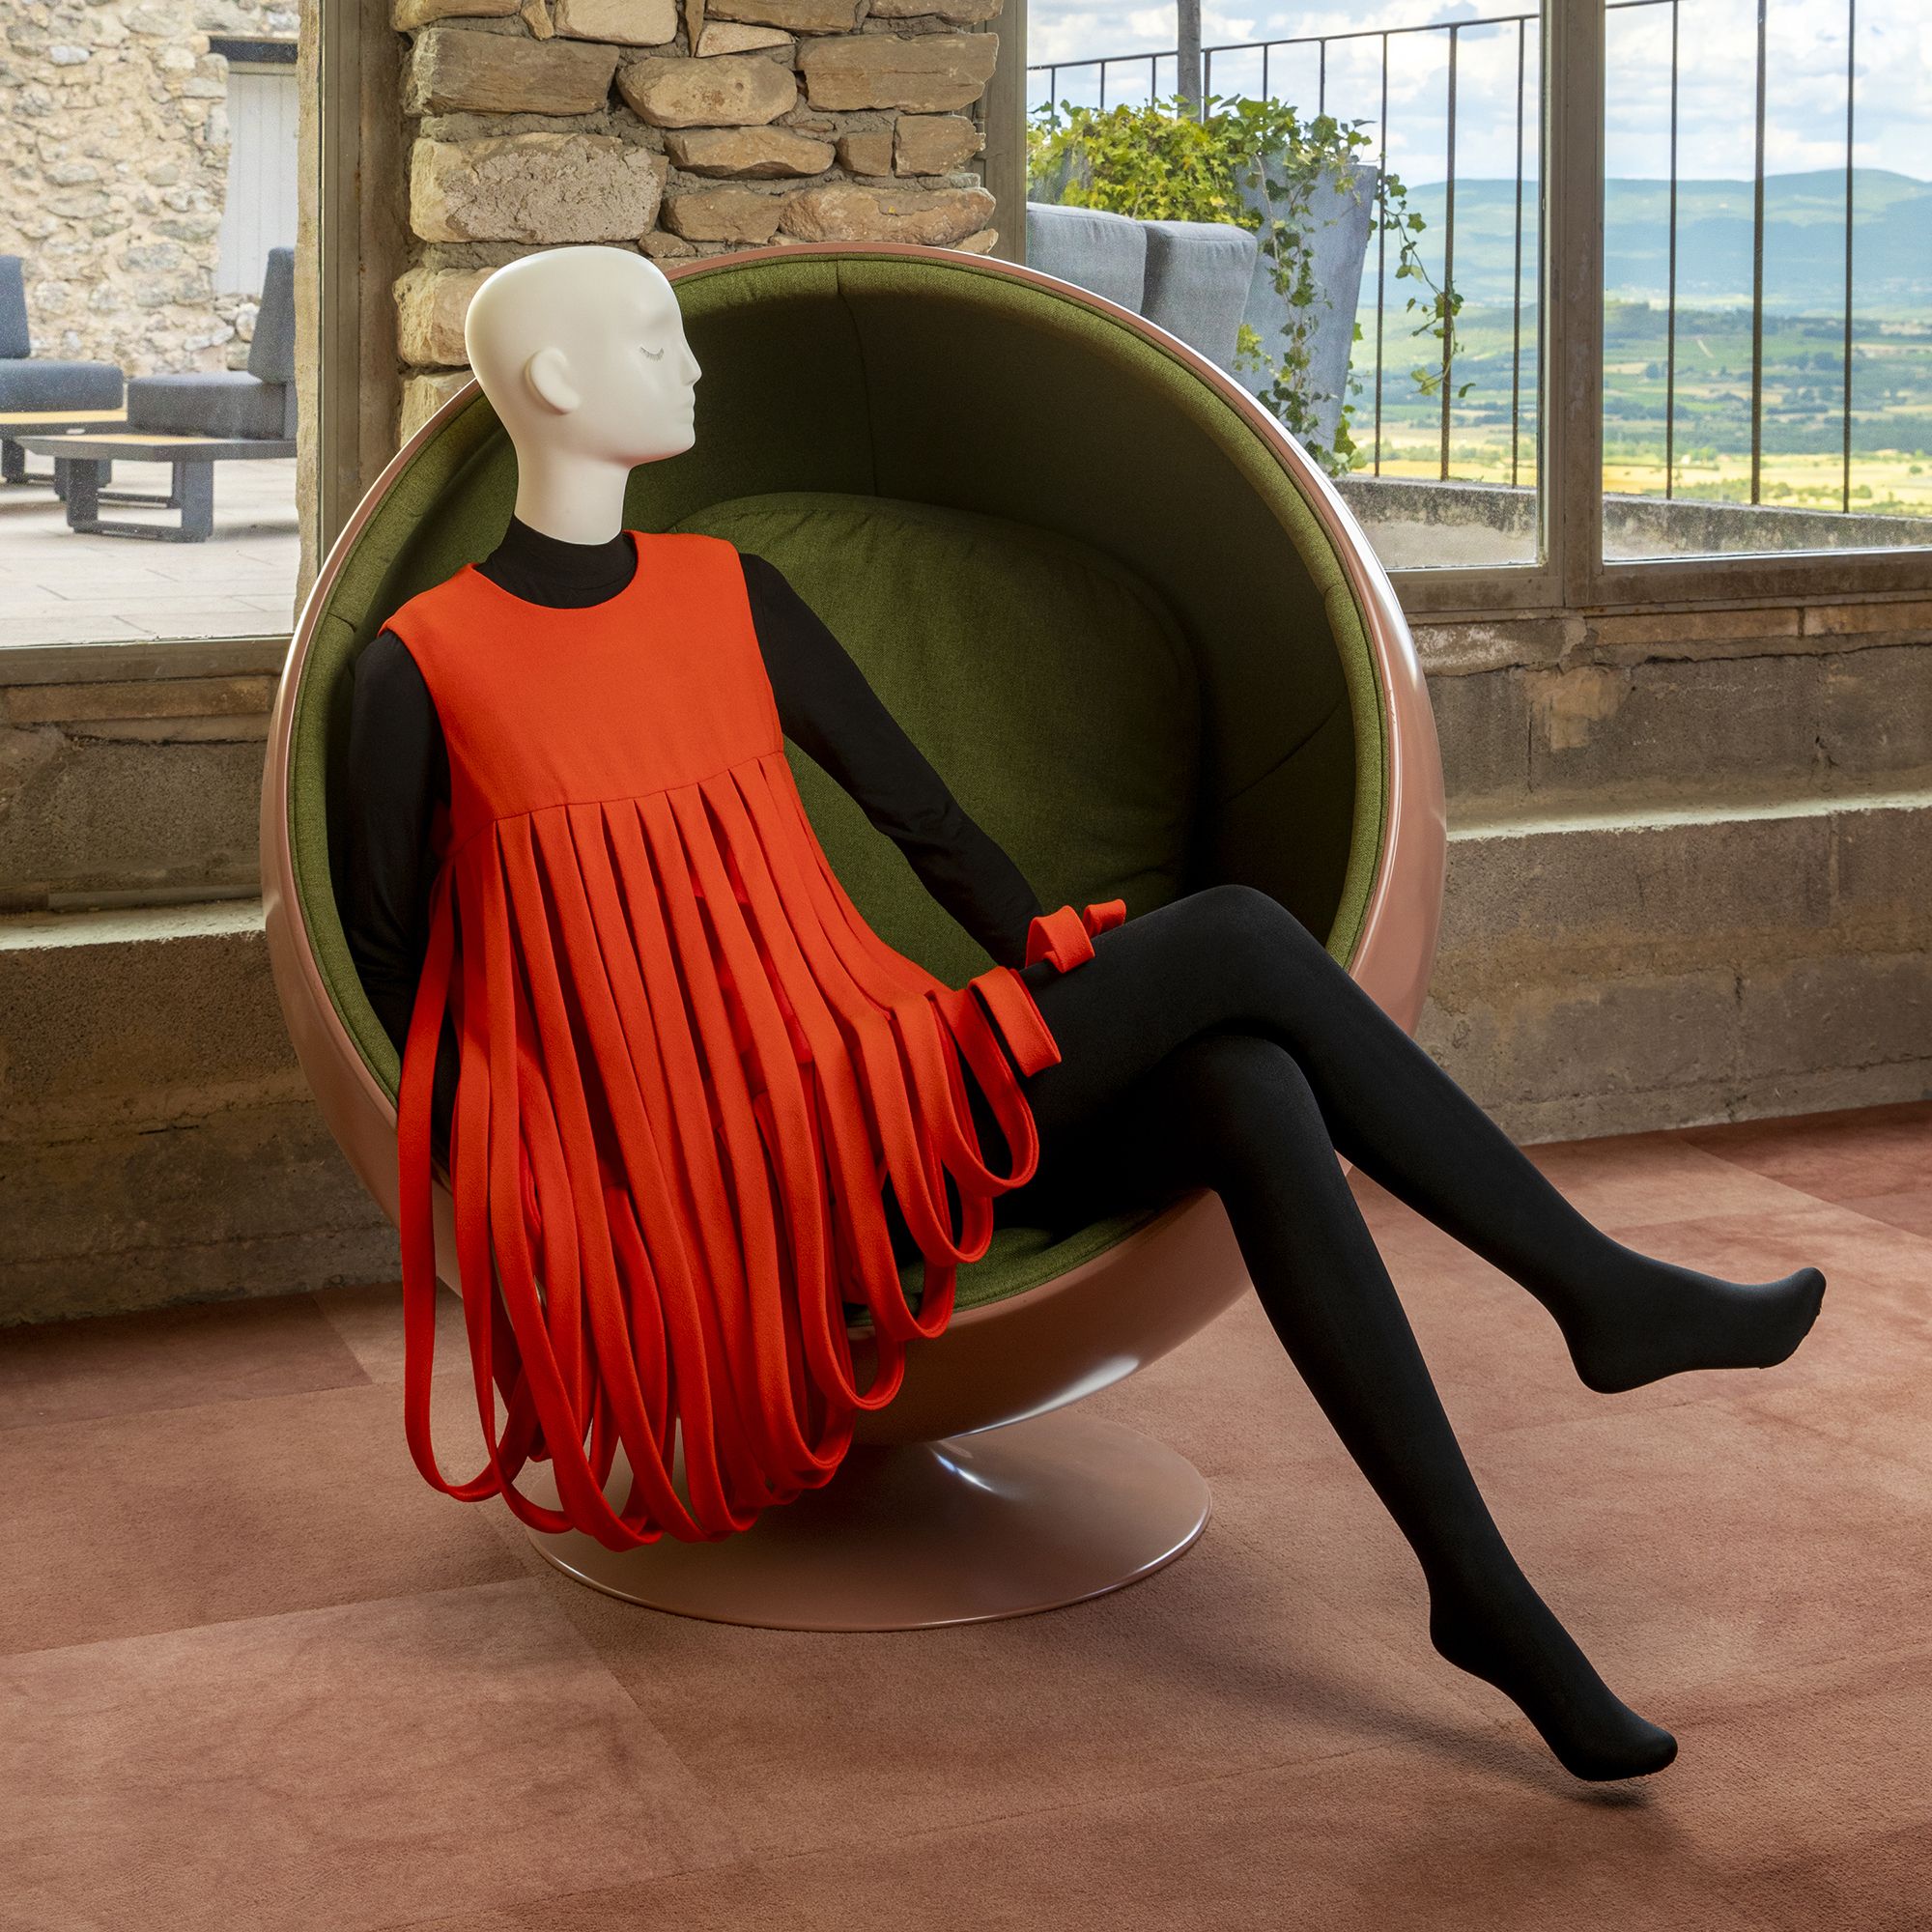 A Pierre Cardin Exhibit in France Celebrates His Influence on Students